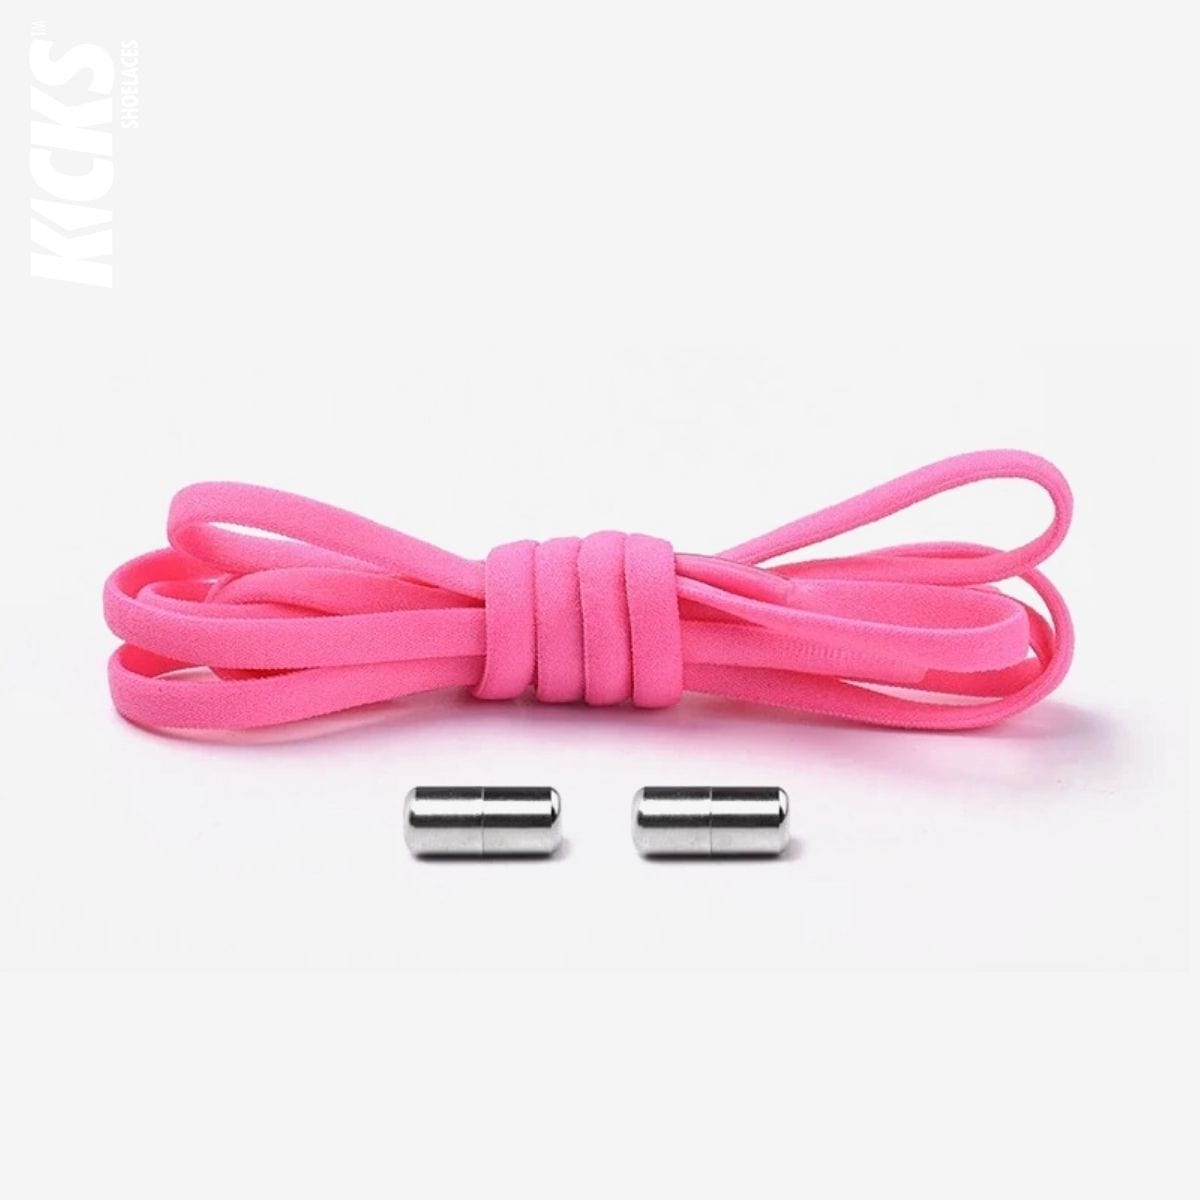 hot-pink-kids-elastic-no-tie-shoe-laces-for-sneakers-by-kicks-shoelaces